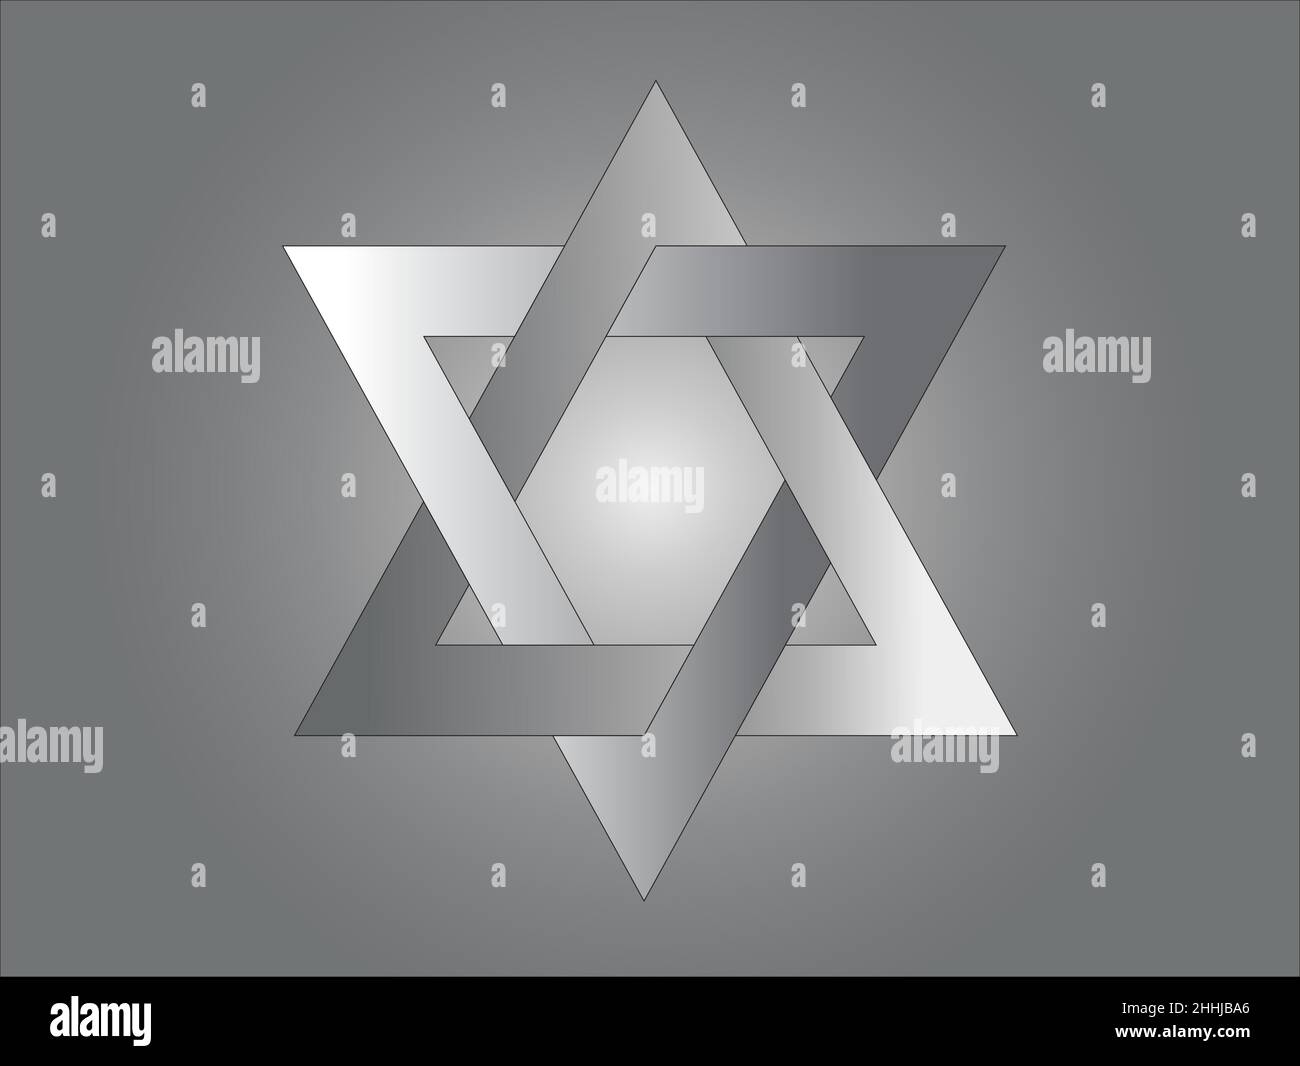 A graphic depicting a five-pointed, gray star created by joining two triangles. It is placed on a gray background. Stock Vector